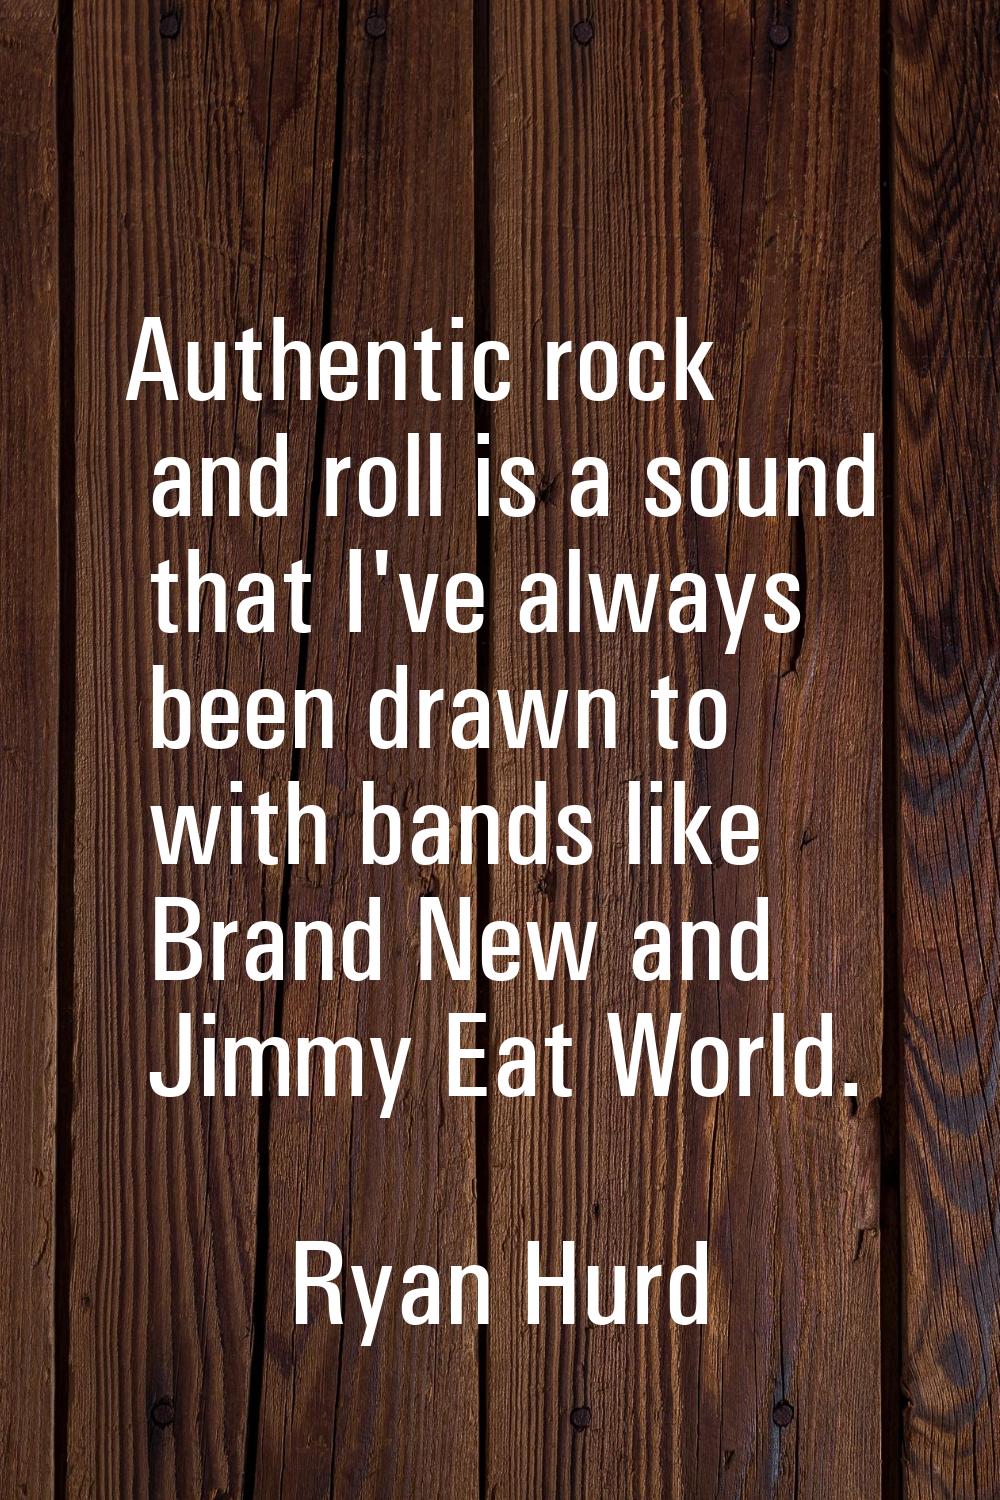 Authentic rock and roll is a sound that I've always been drawn to with bands like Brand New and Jim